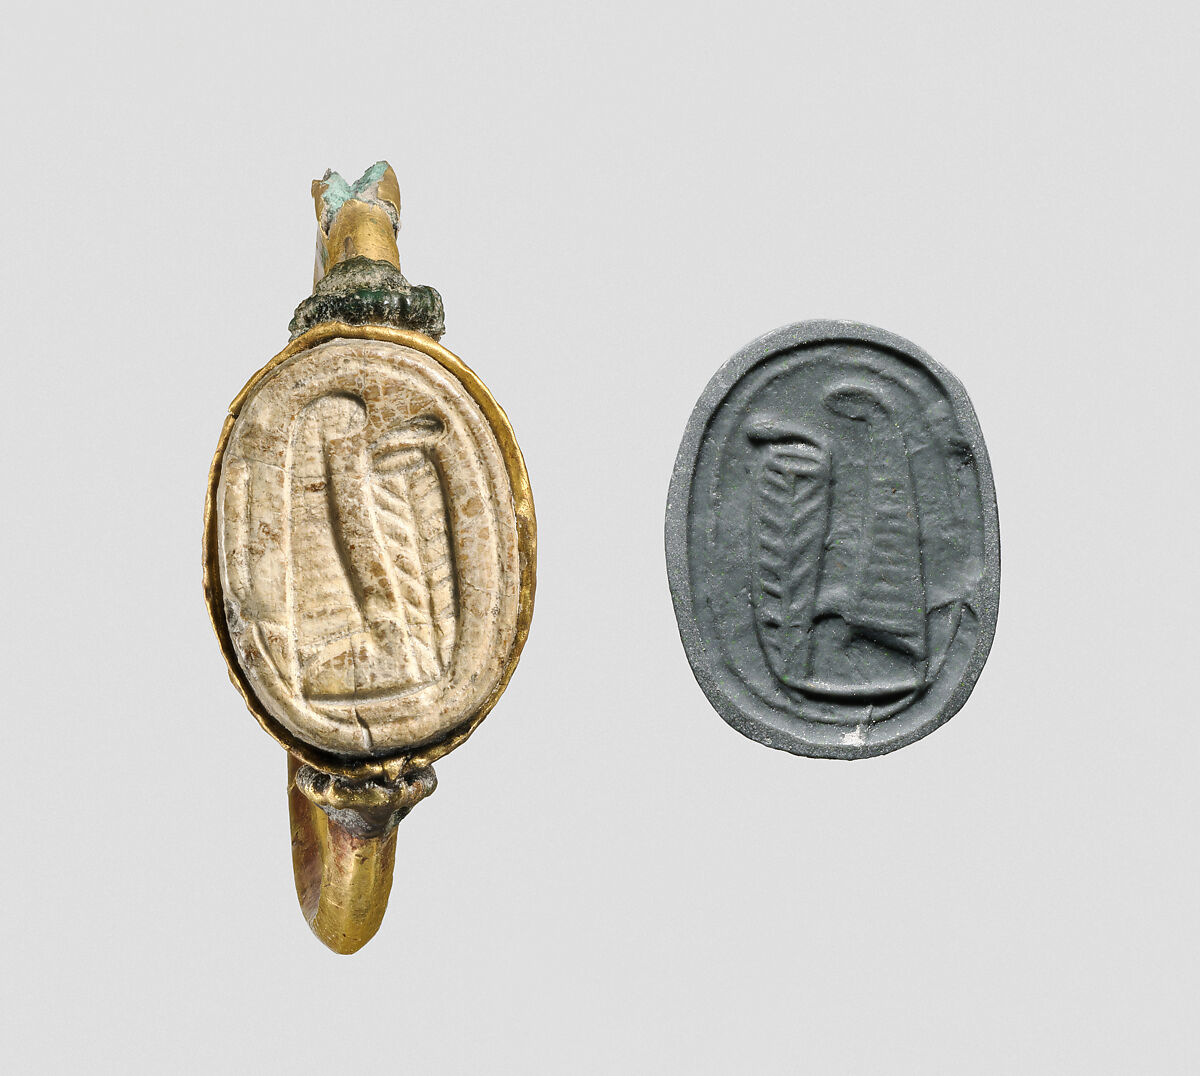 Gold ring with glass scarab, Gold, glass paste, Cypriot 